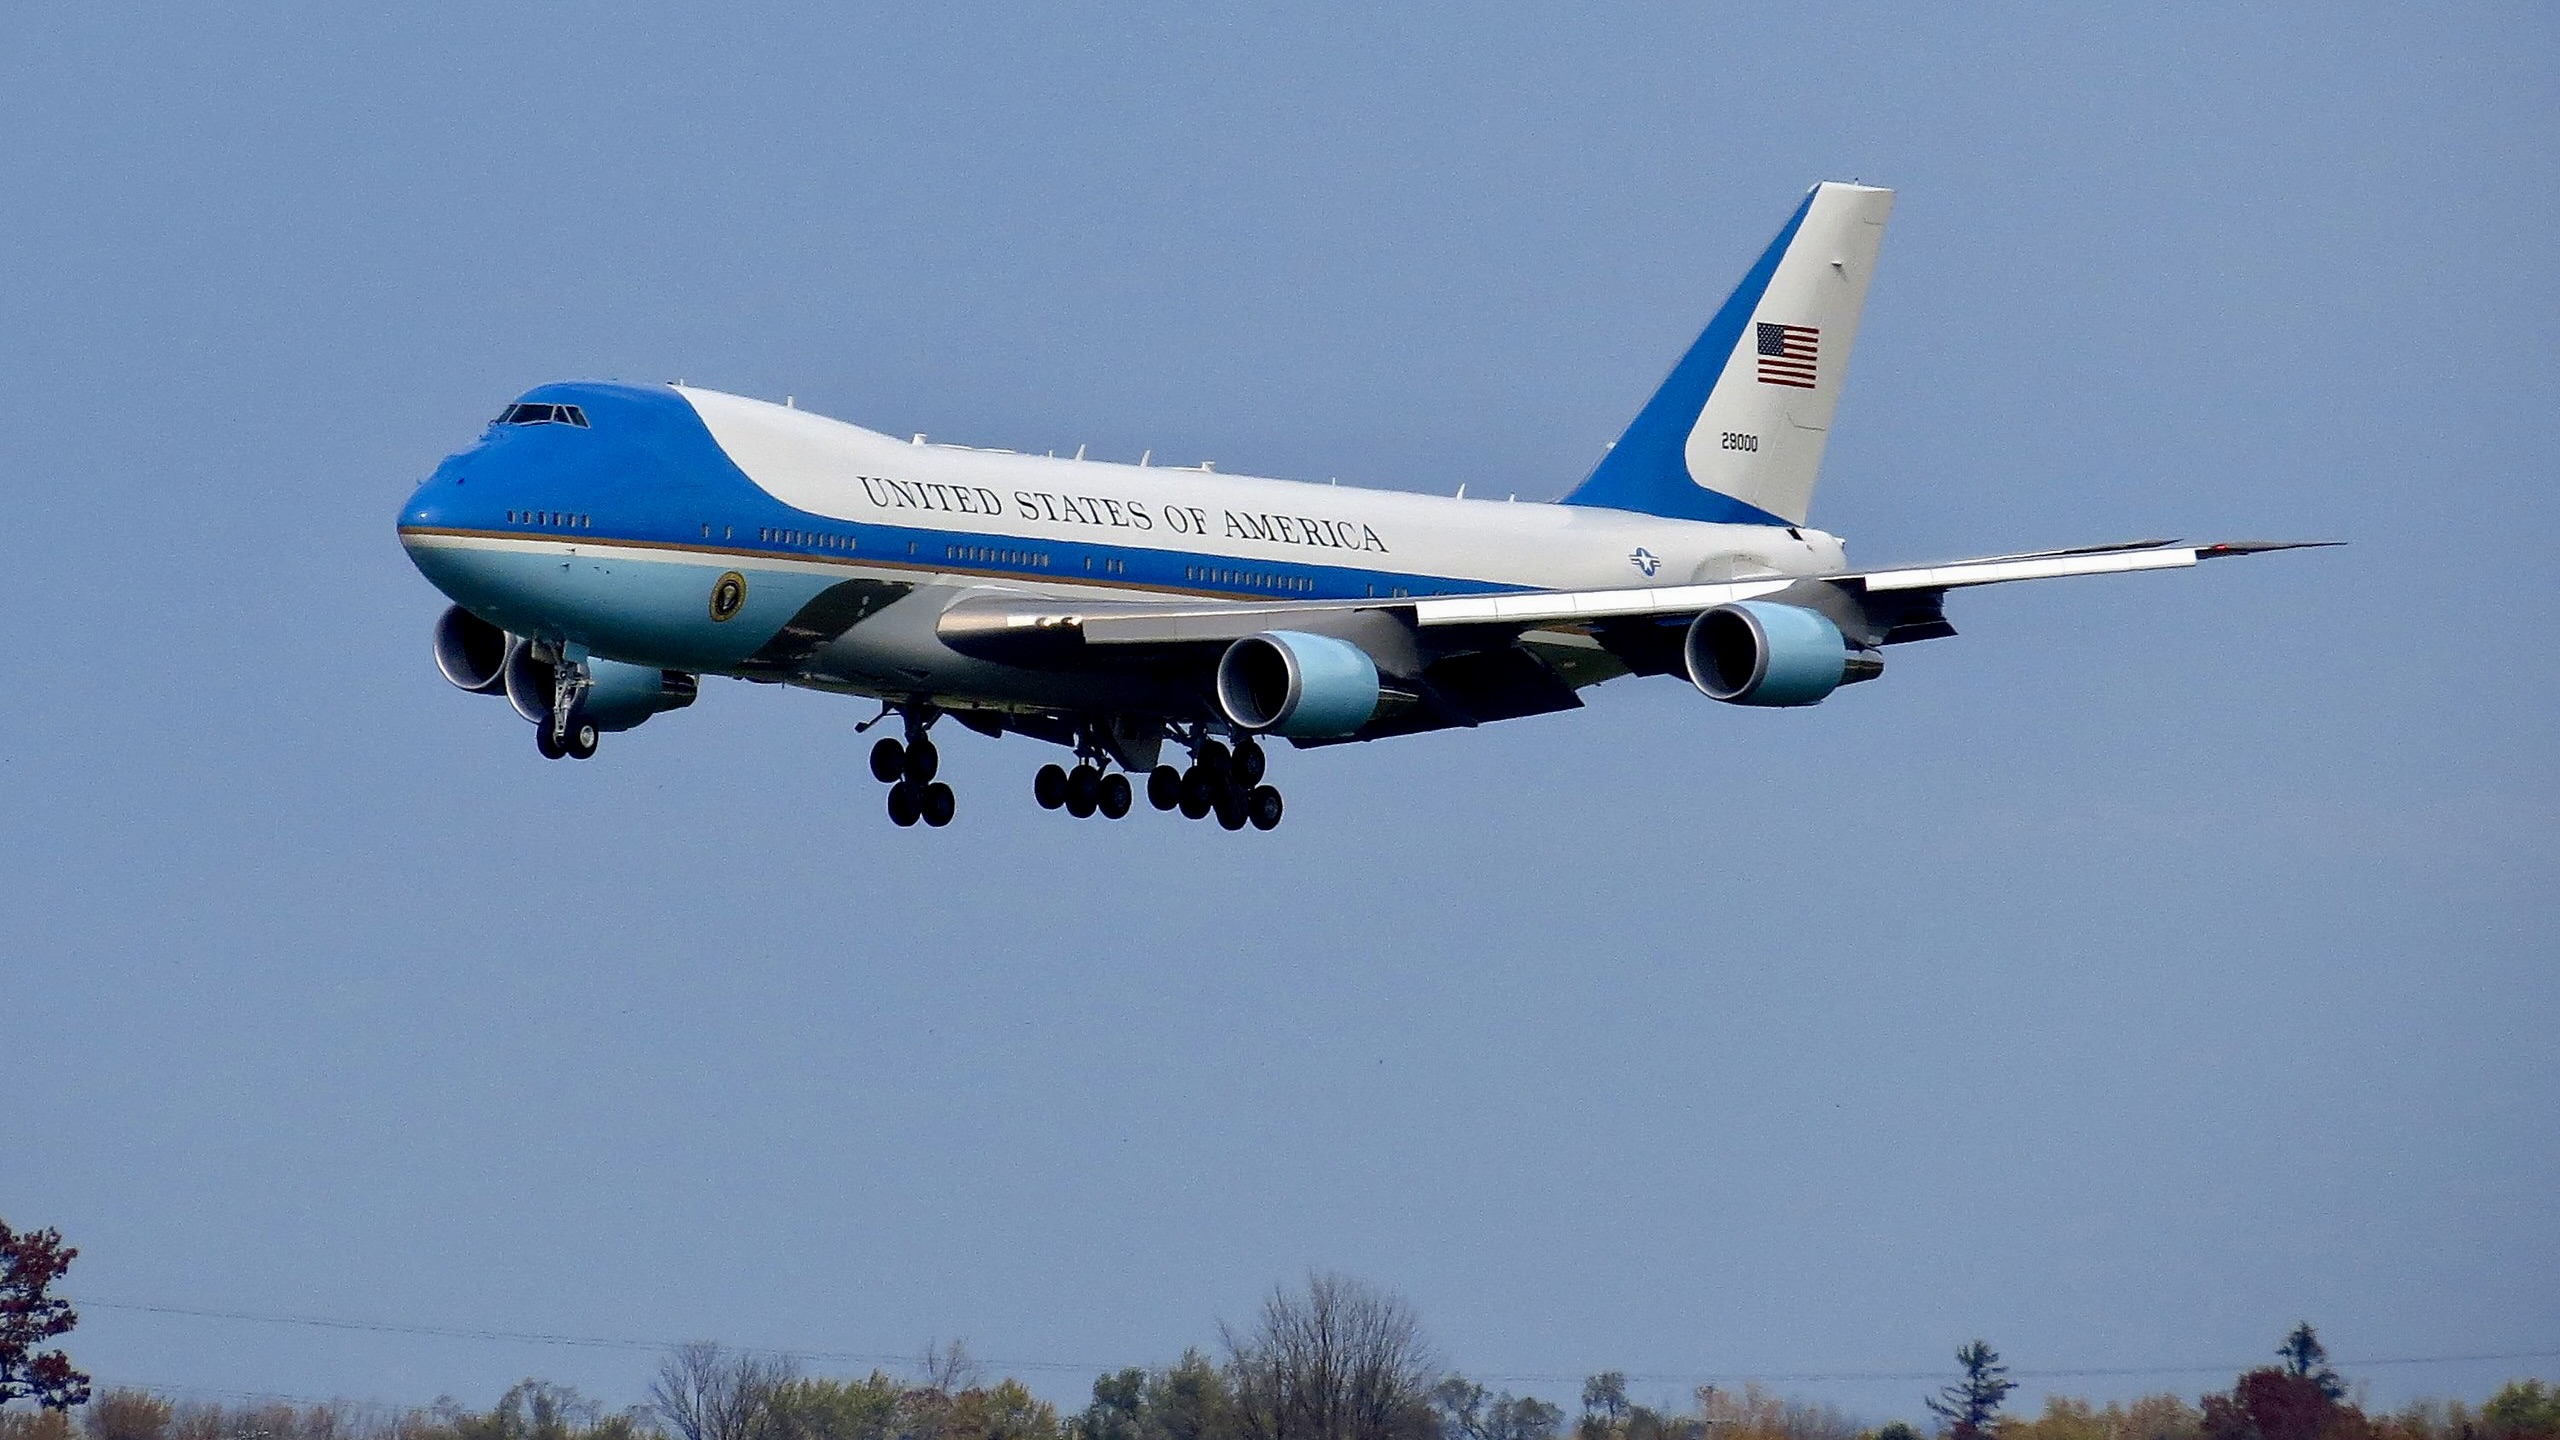 SAM 29000, one of two VC-25As used as Air Force One